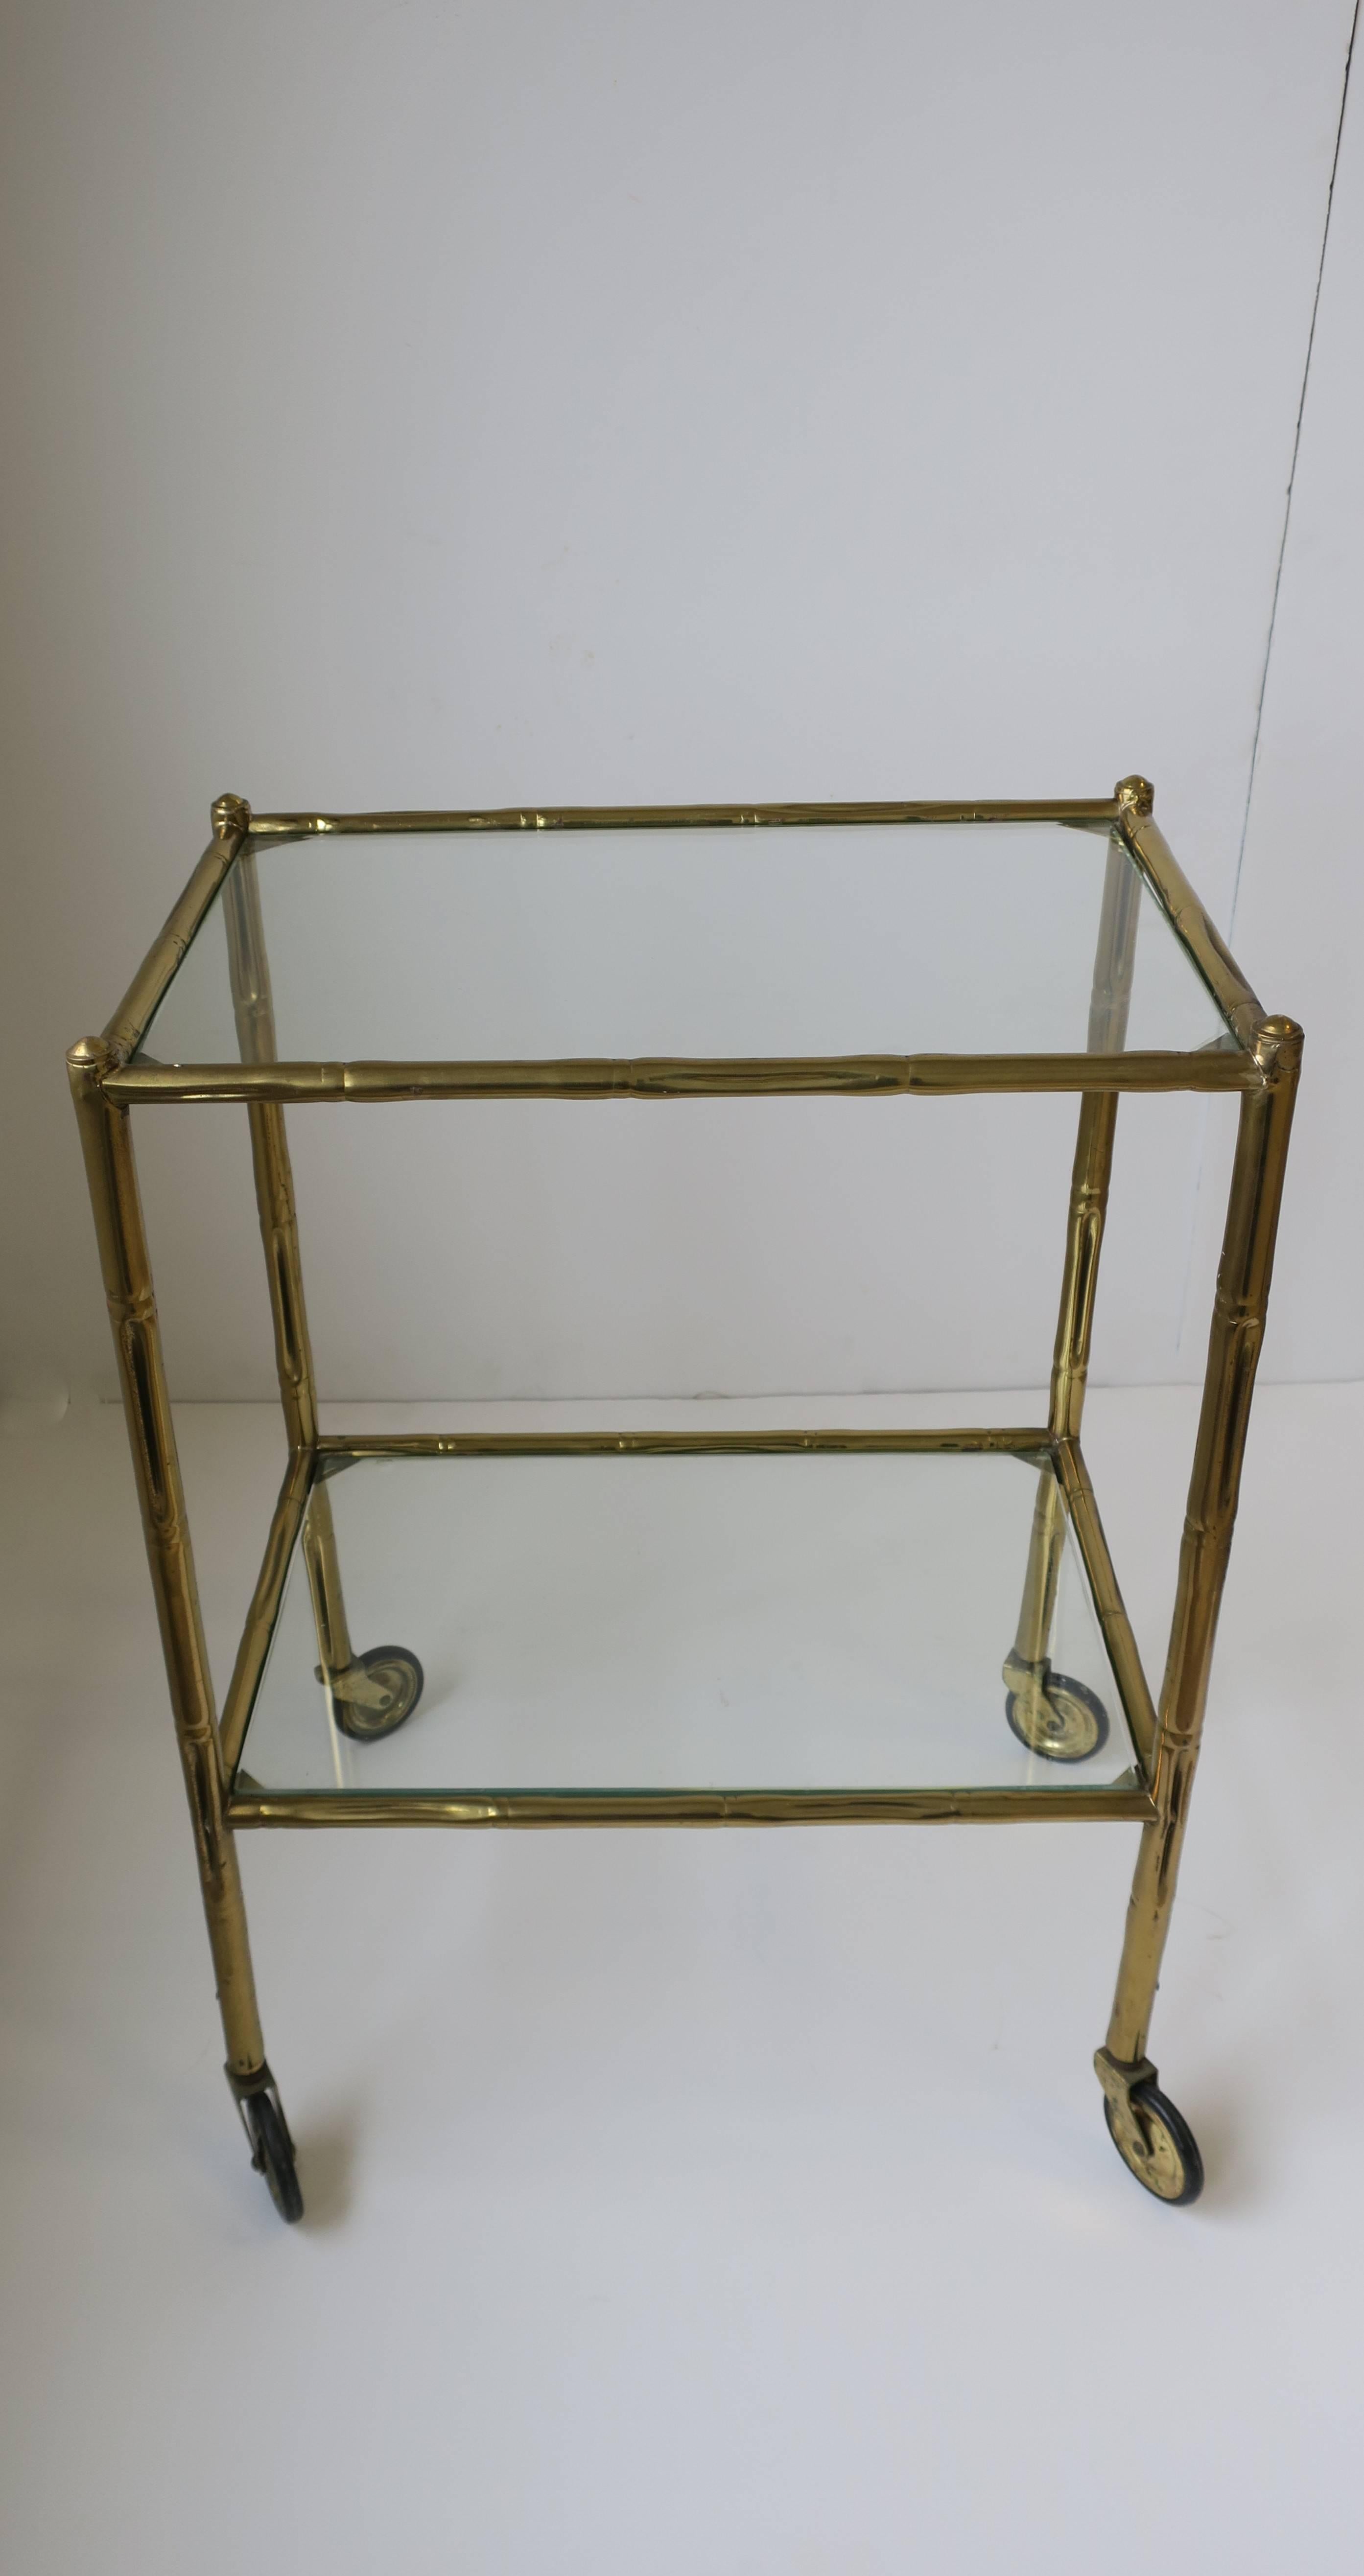 Vintage Italian Brass and Glass Bar Cart or Side Table, Italy 1